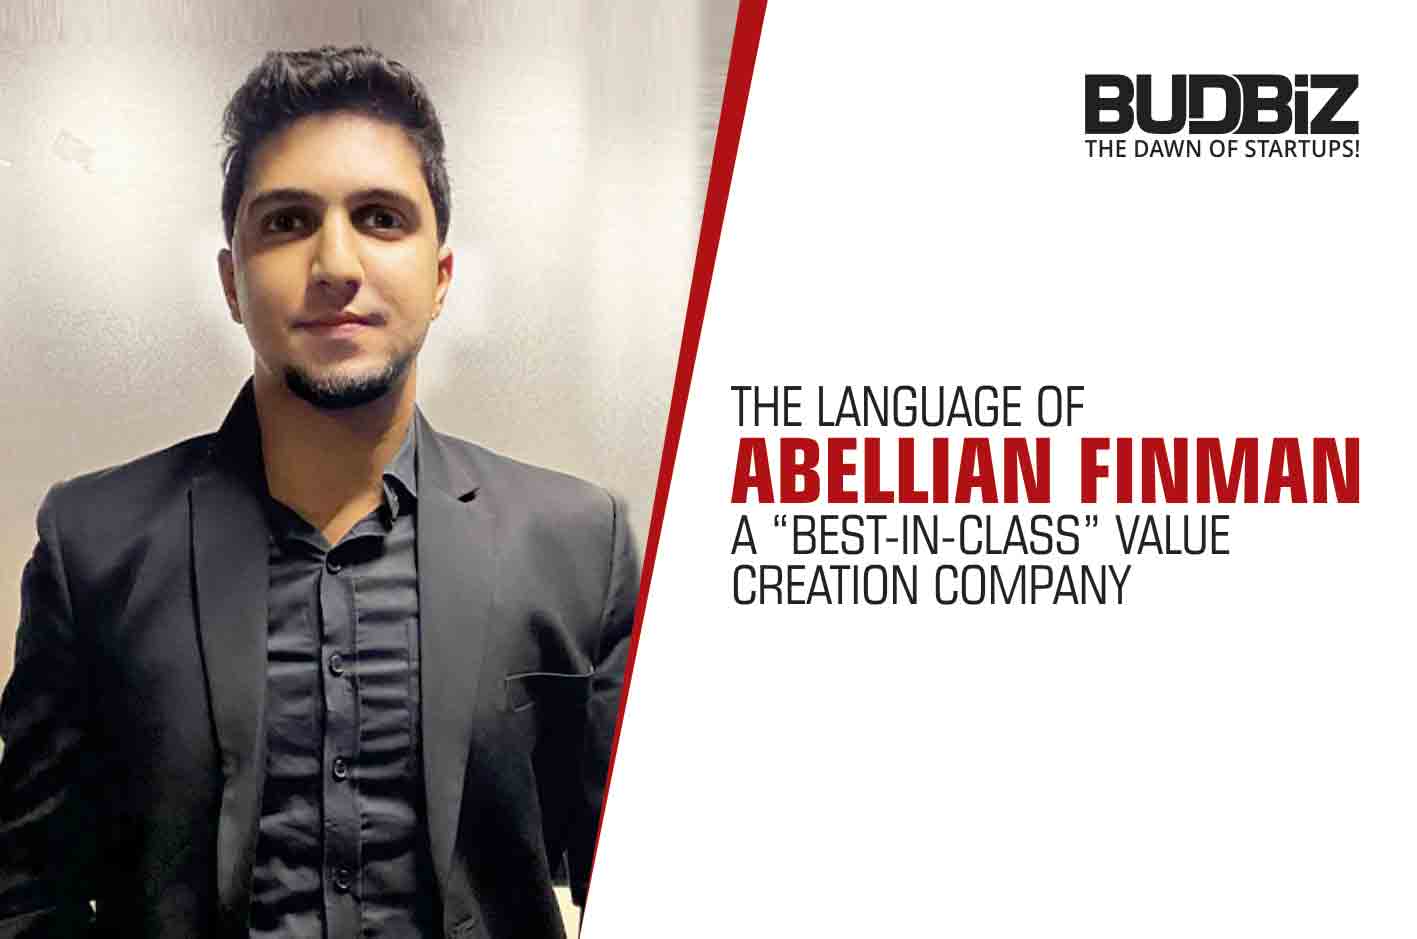 THE LANGUAGE OF ABELLIAN FINMAN: A “BEST-IN-CLASS” VALUE CREATION COMPANY